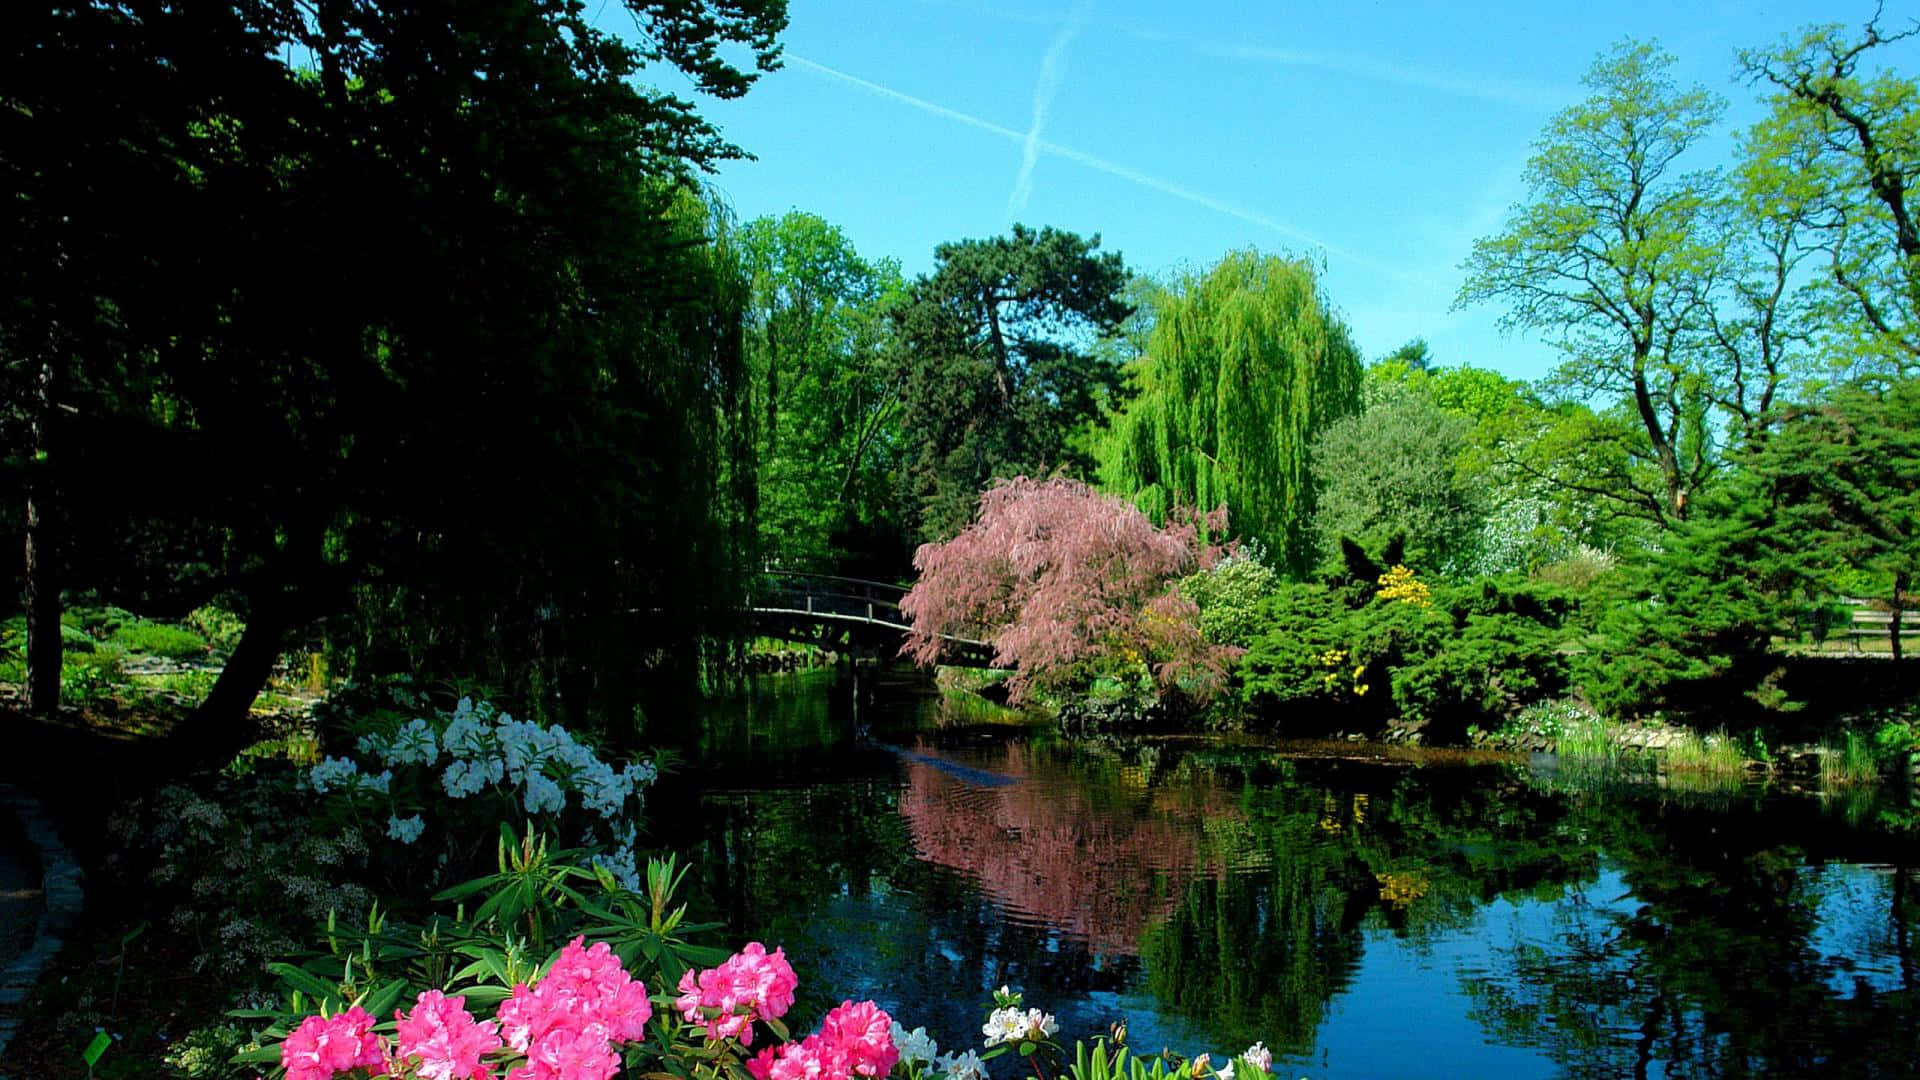 A Pond With Flowers And Trees In The Background